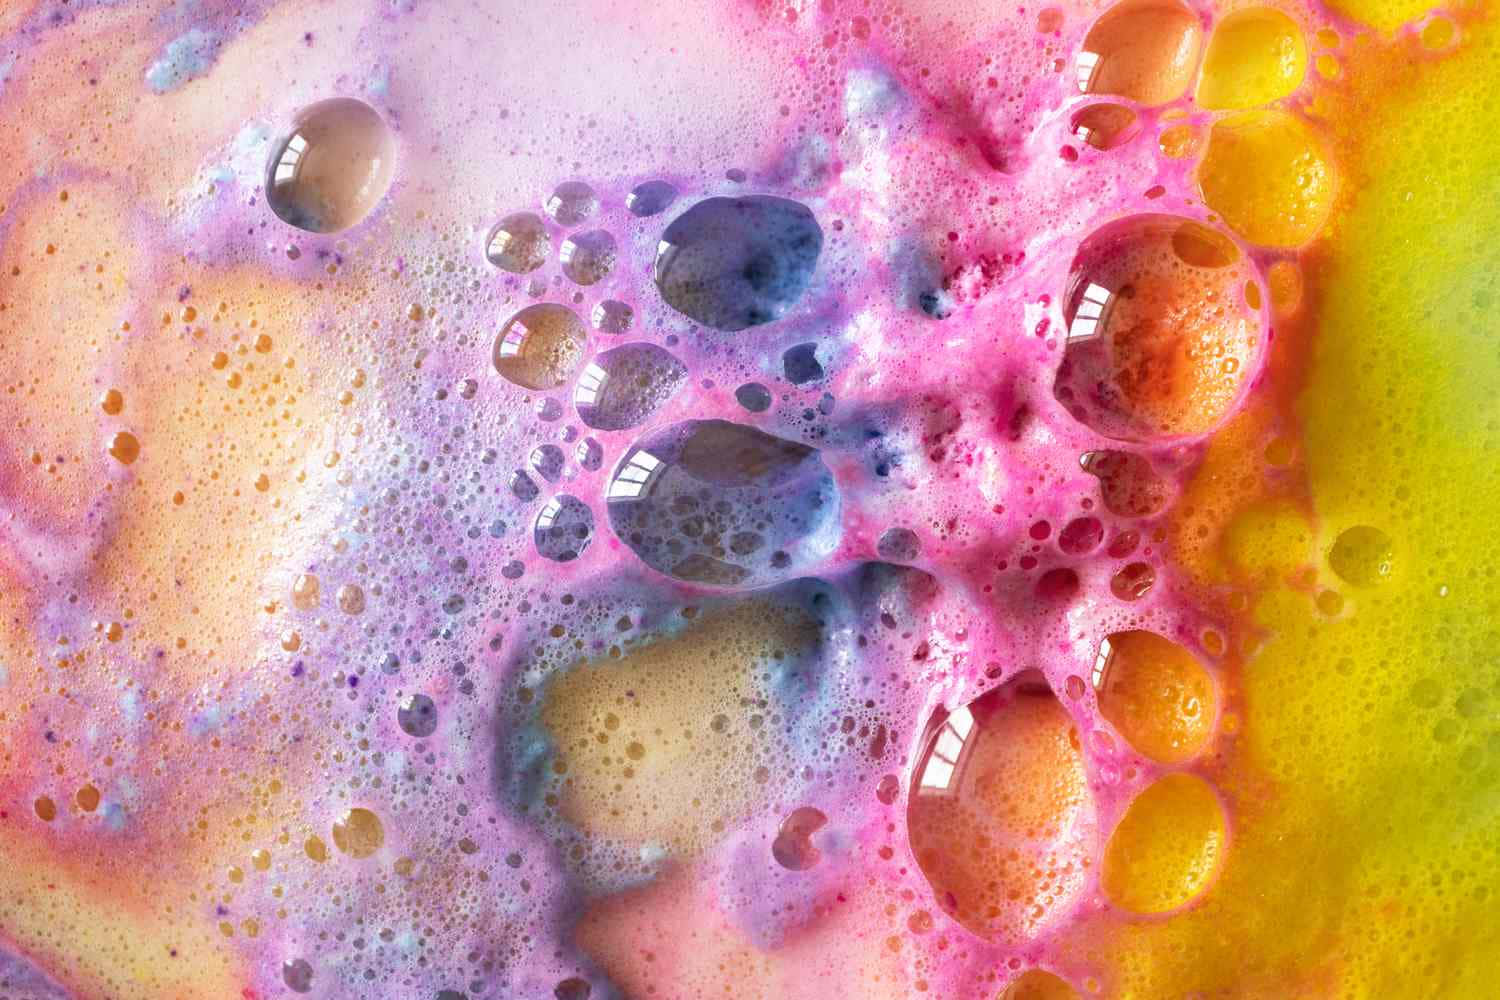 Have Fun With Colorful Soap Bubbles!